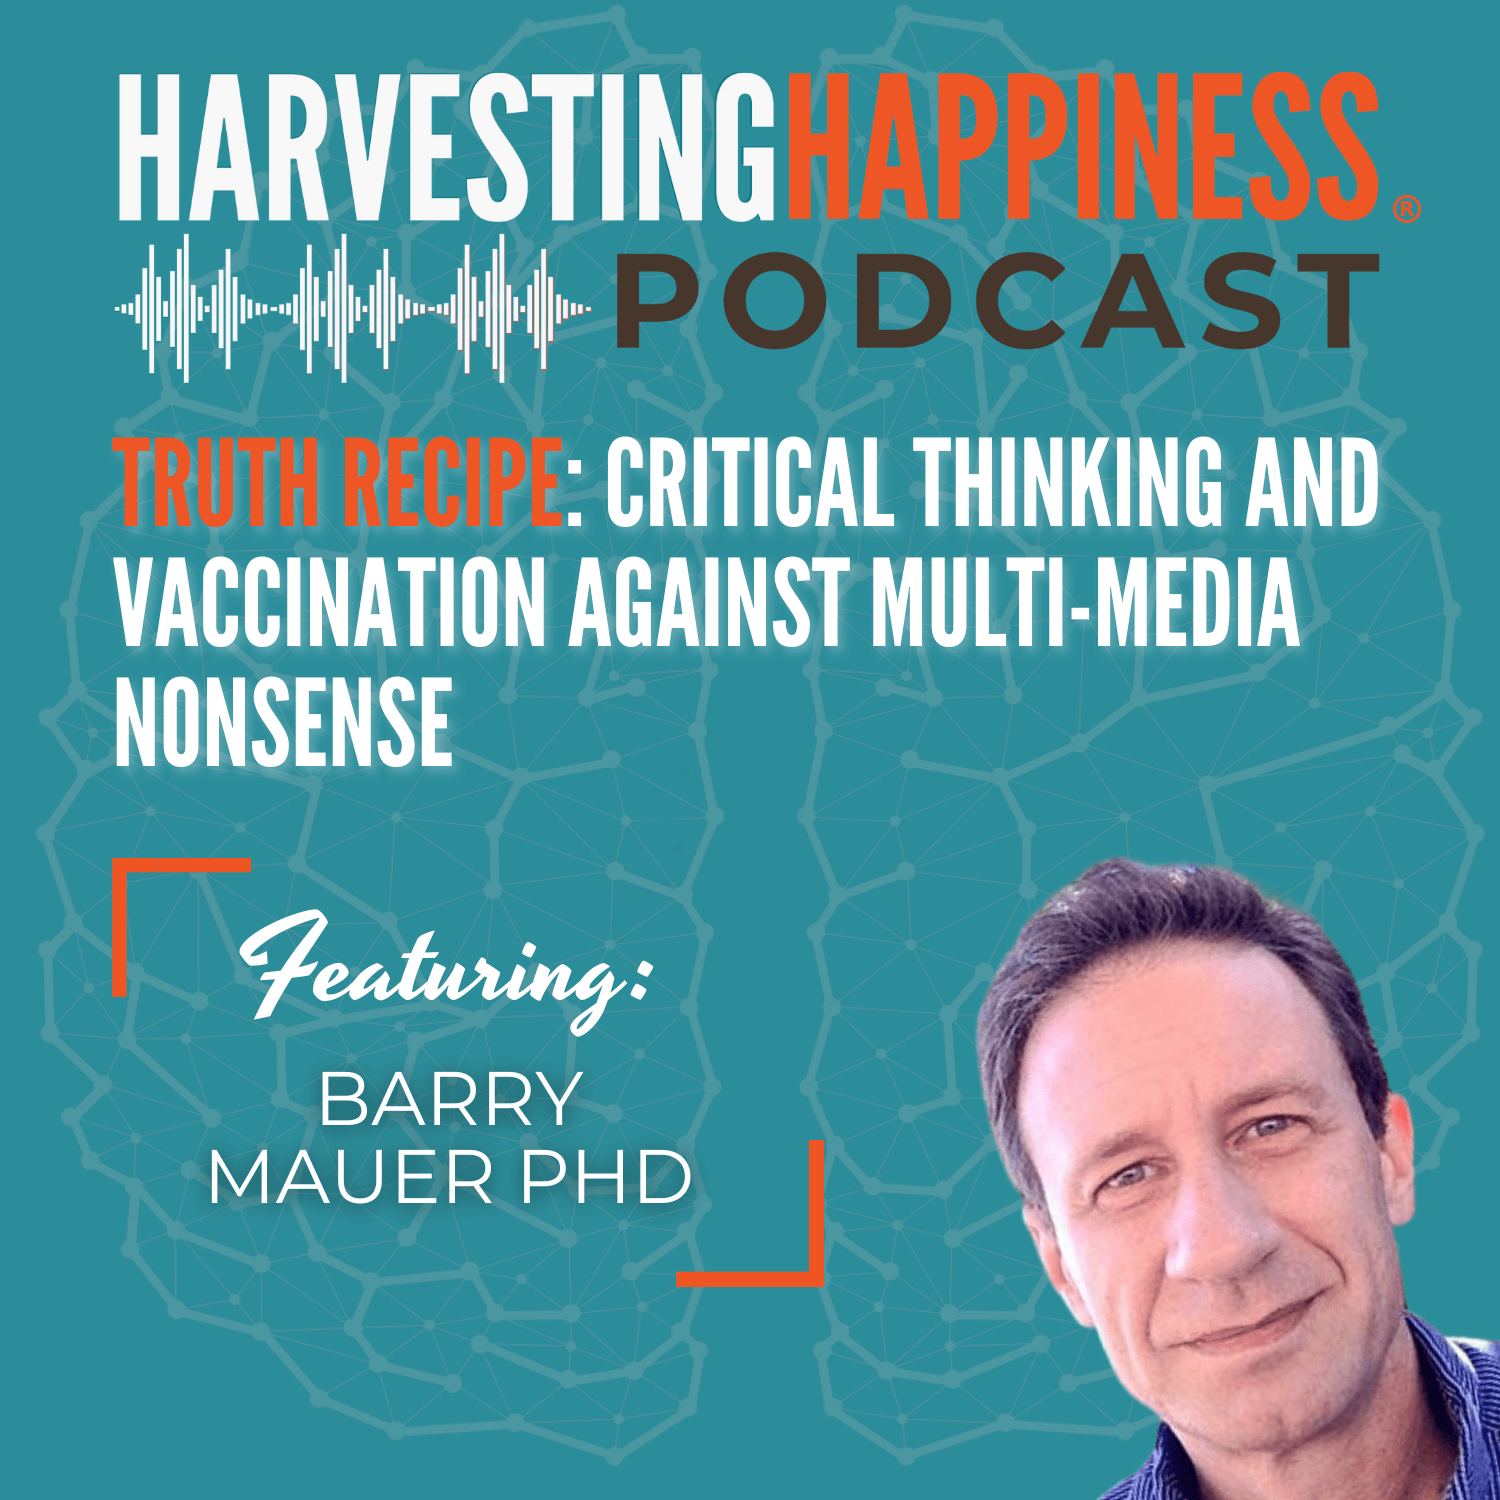 Truth Recipe: Critical Thinking and Vaccination Against Multi-Media Nonsense with Barry Mauer PhD